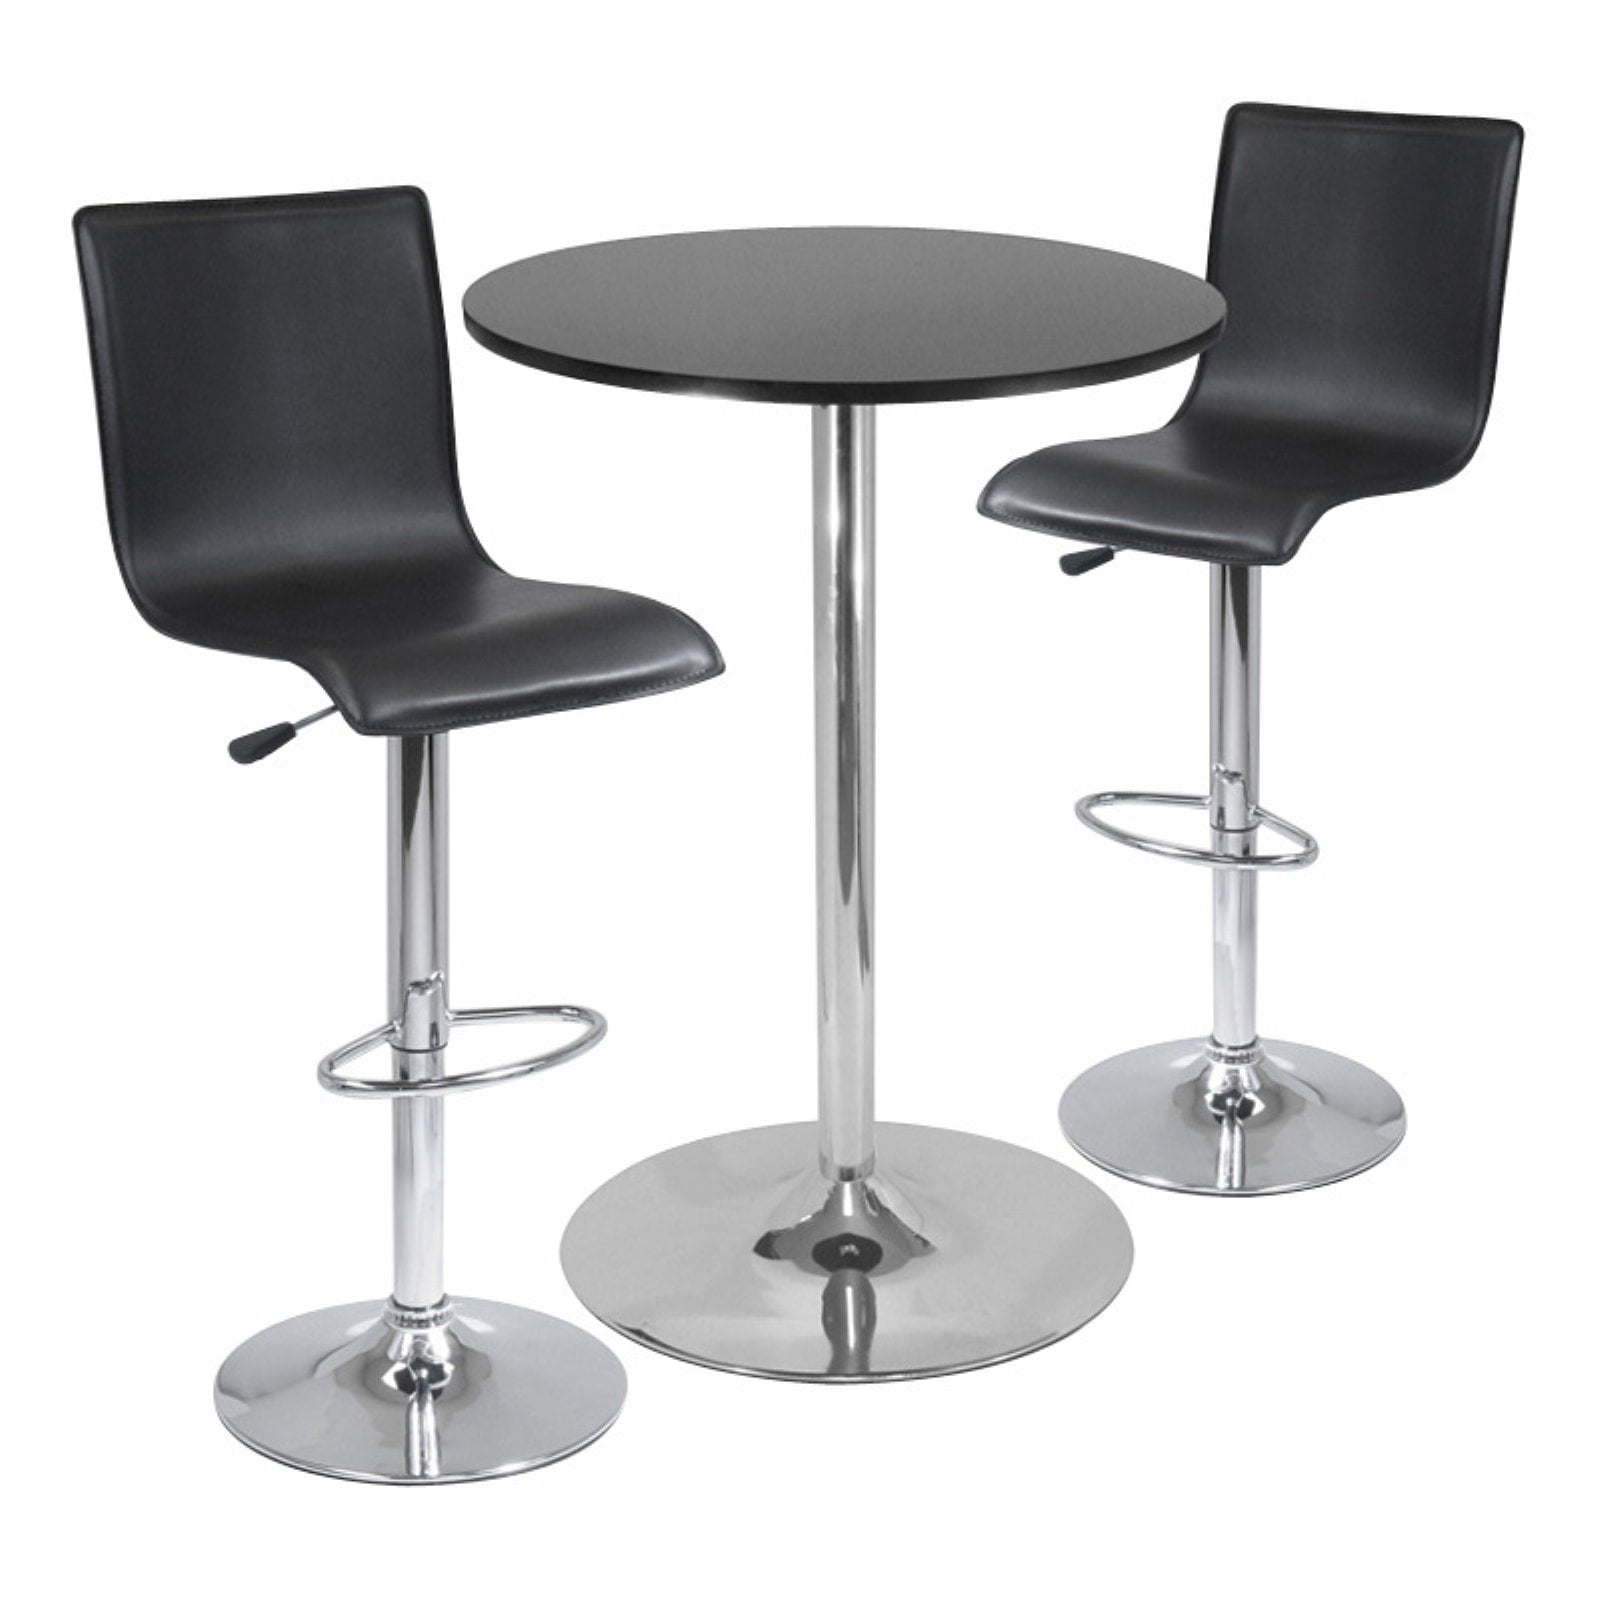 Winsome Kingsgate High/Pub Dining Table with Cushioned Saddle Stool 3-Piece